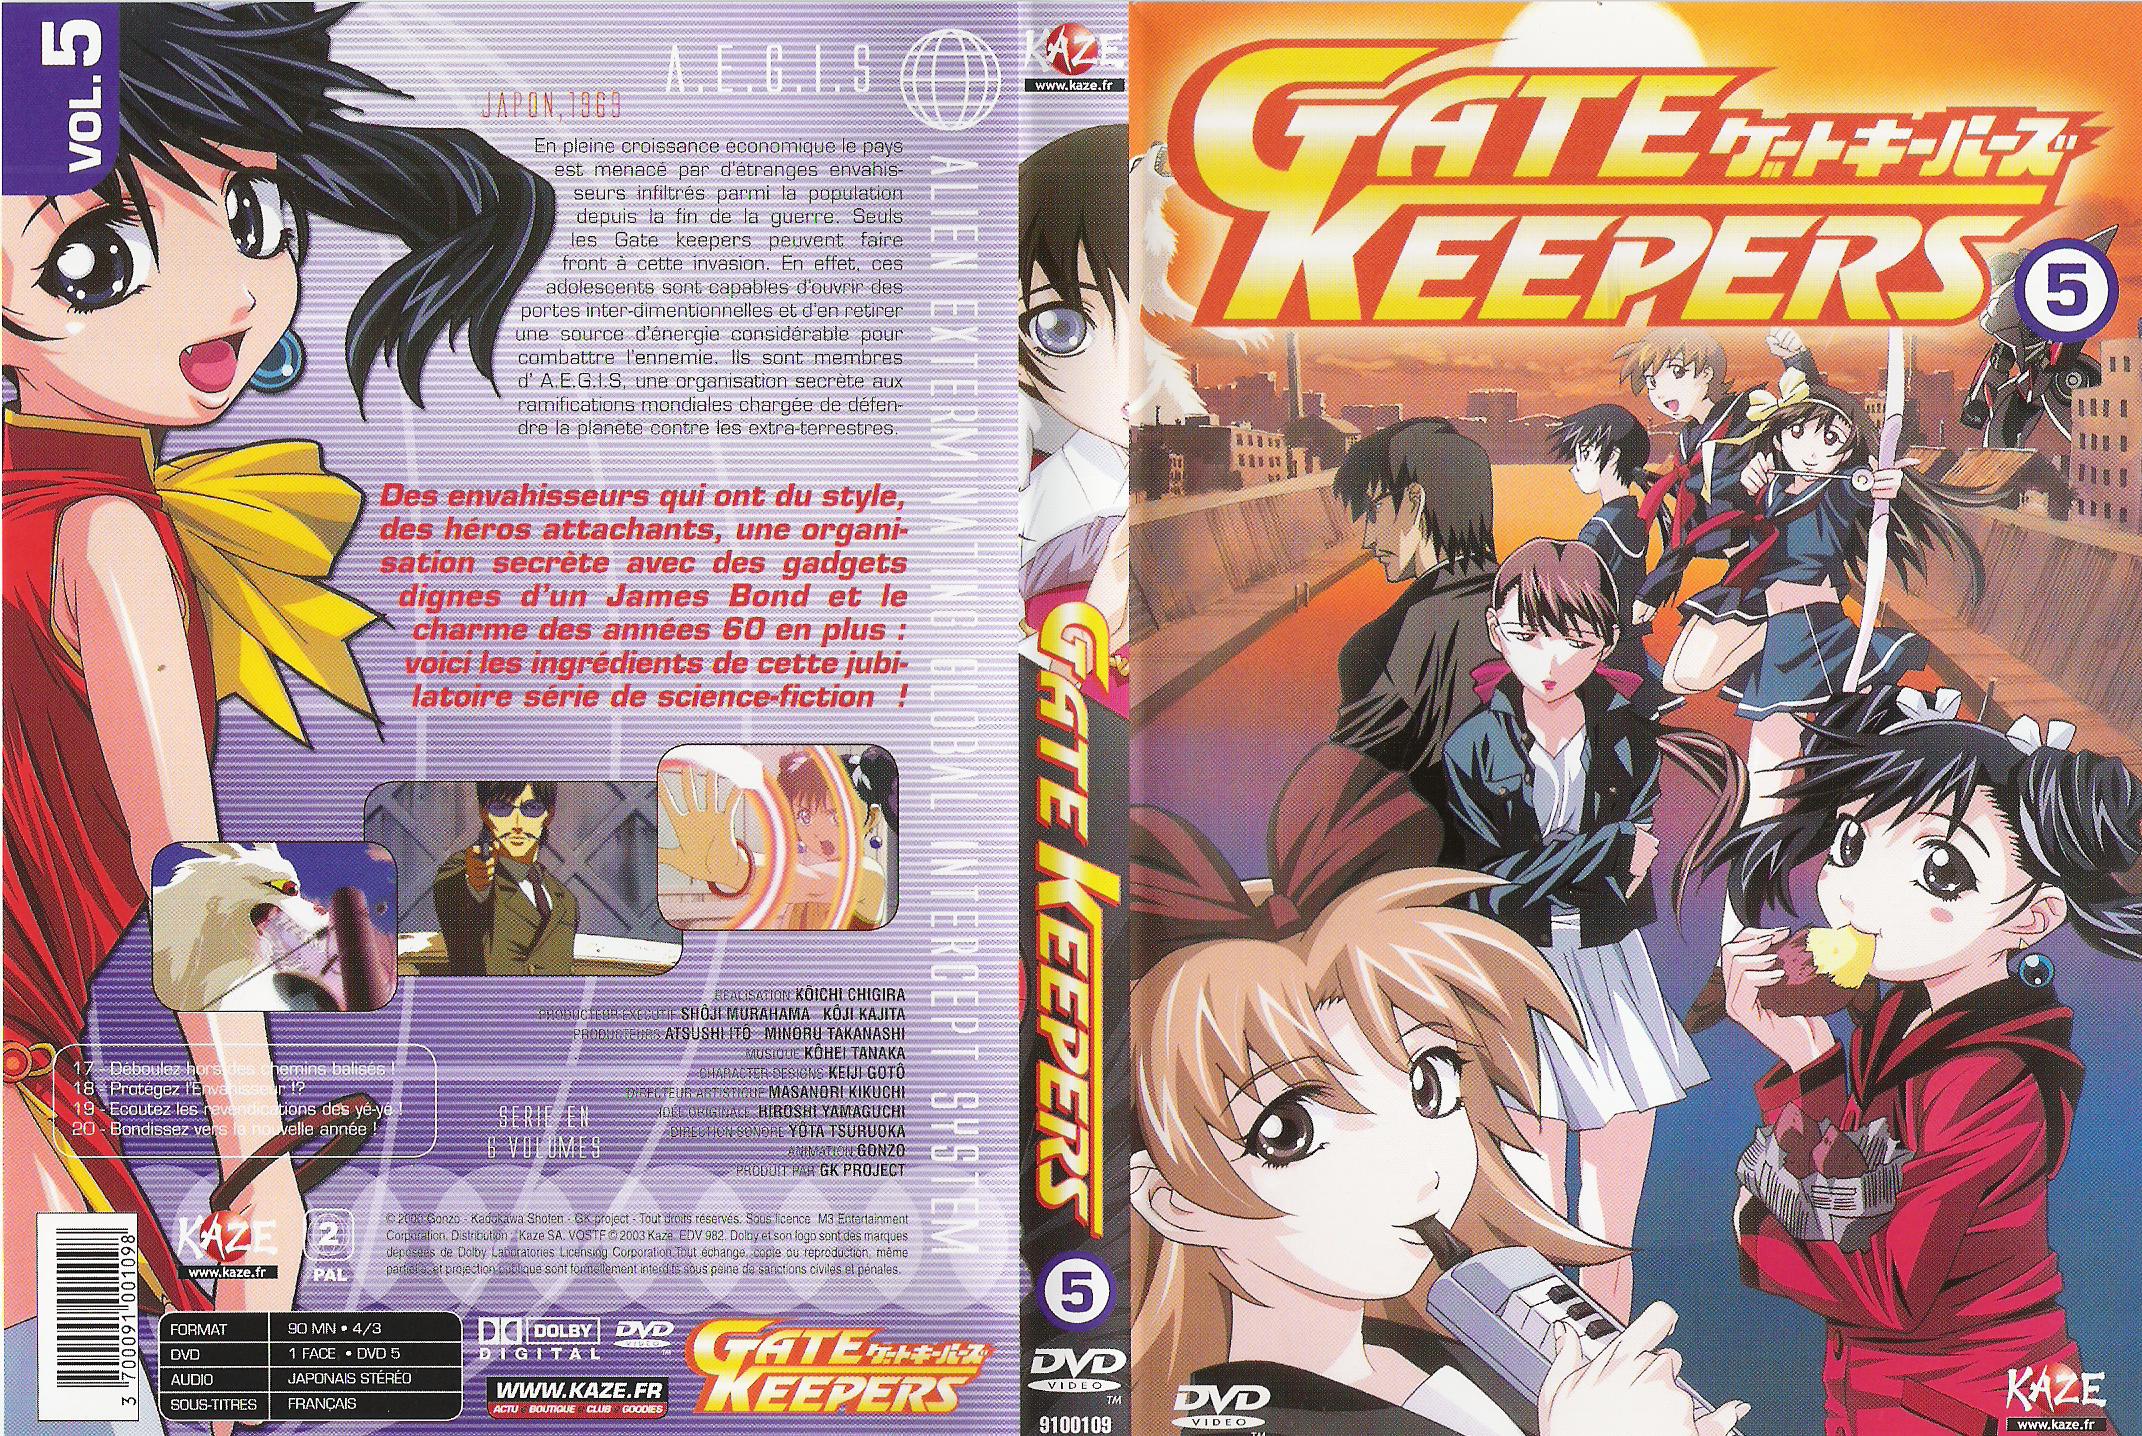 Jaquette DVD Gate Keepers DVD 5